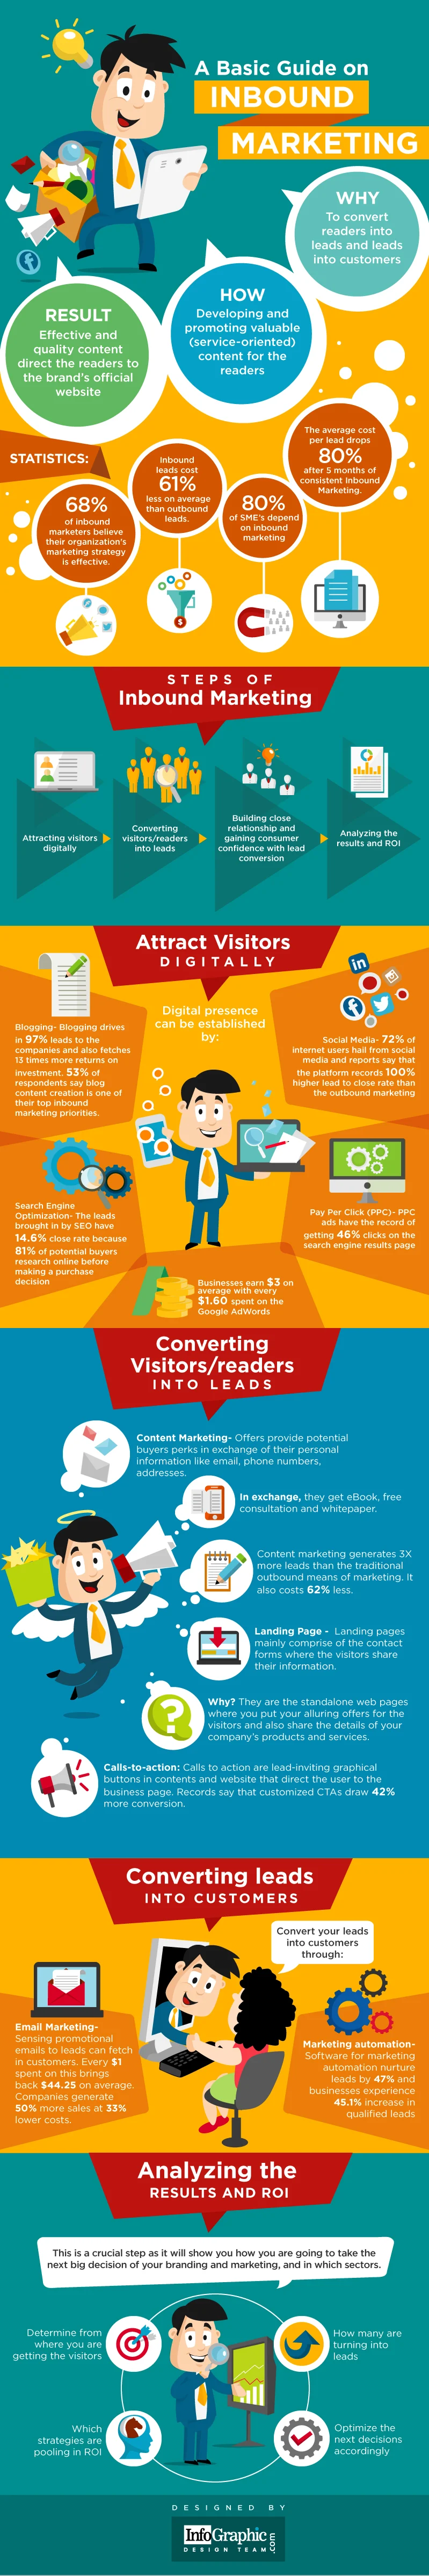 How Inbound Marketing Can Help You Convert Leads? - Infographic